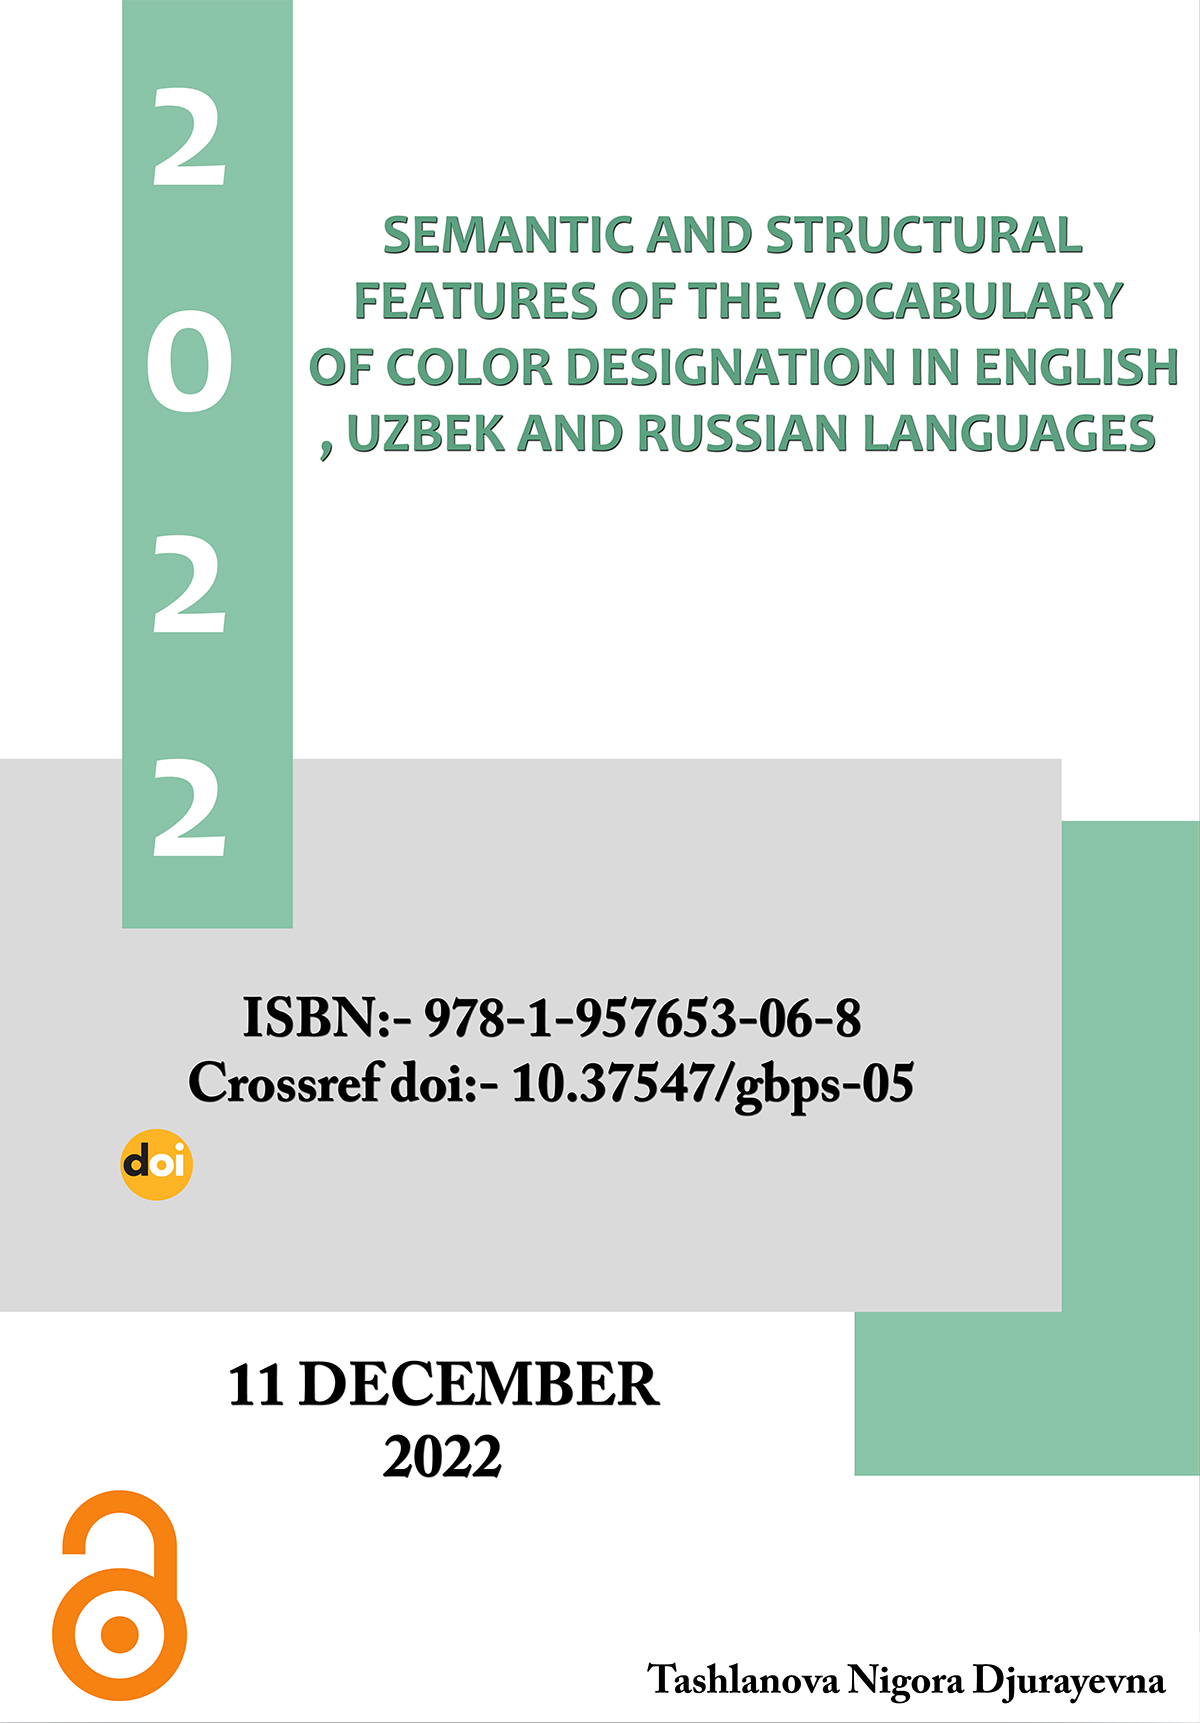 					View SEMANTIC AND STRUCTURAL FEATURES OF THE VOCABULARY OF COLOR DESIGNATION IN ENGLISH, UZBEK AND RUSSIAN LANGUAGES
				